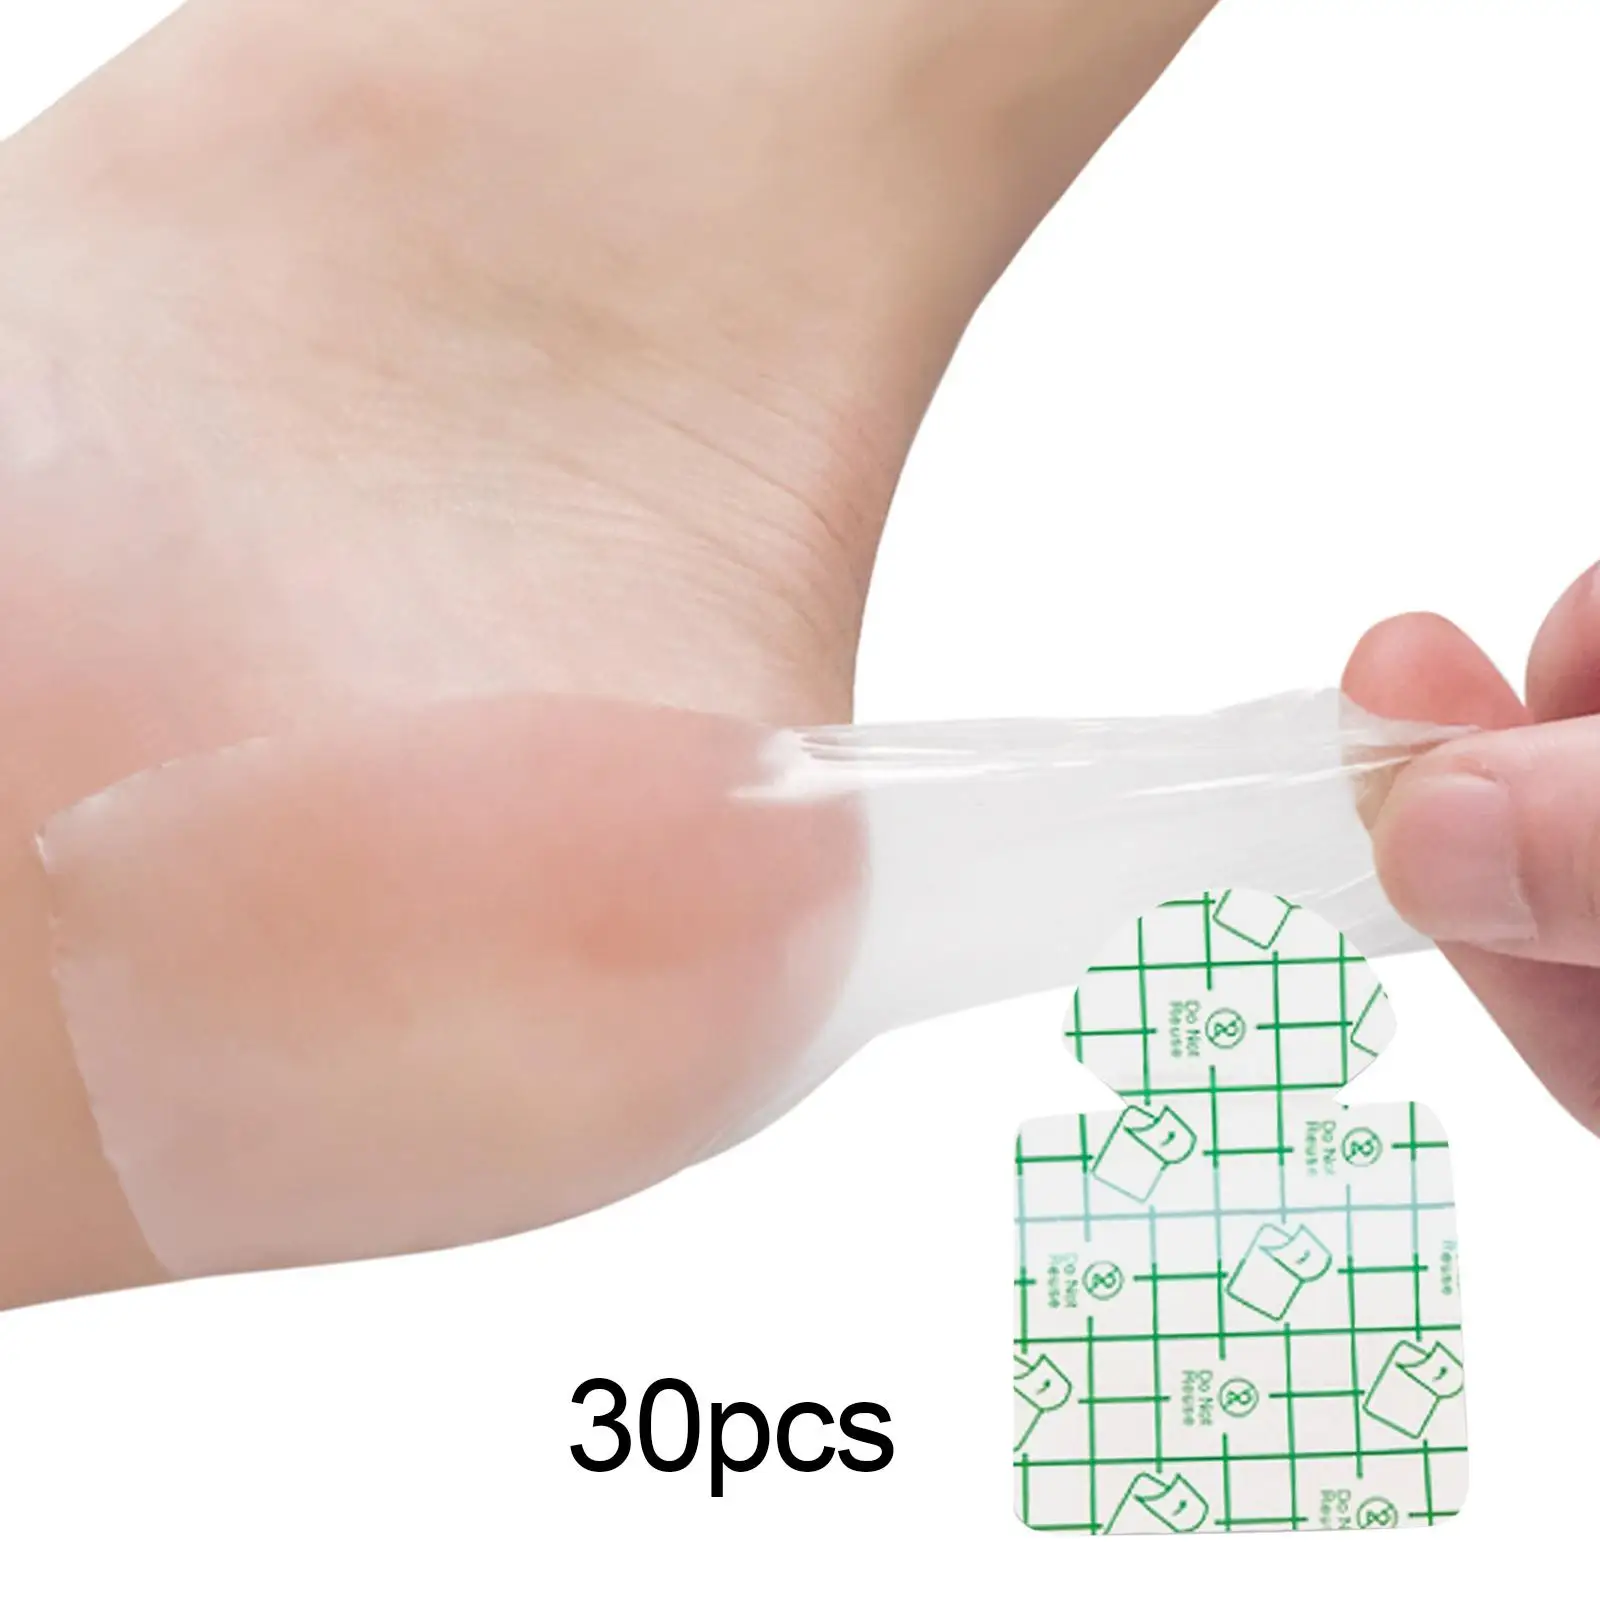 30x Foot Care Sticker Clear Self Adhesive patch Anti Wear Heel Sticker for Men Women Shoes High Heel Sandals